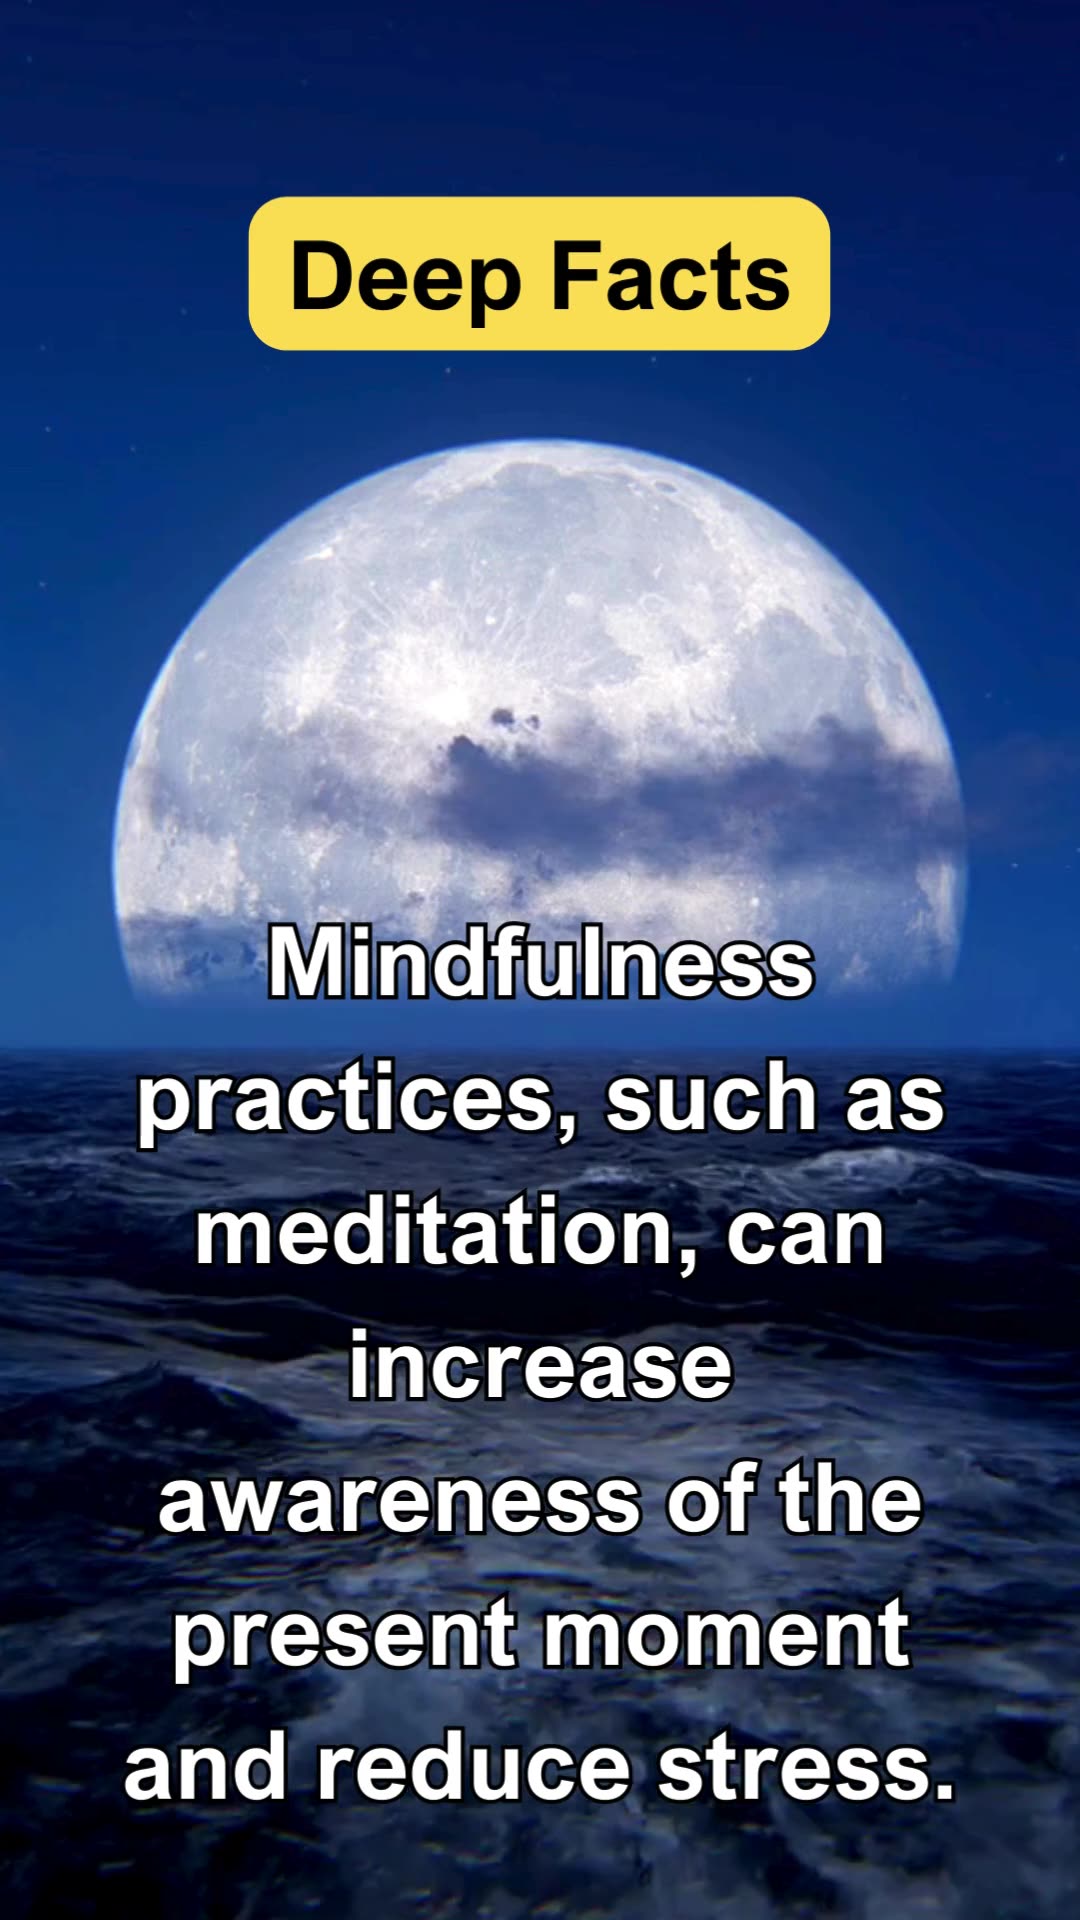 Mindfulness practices, such as meditation